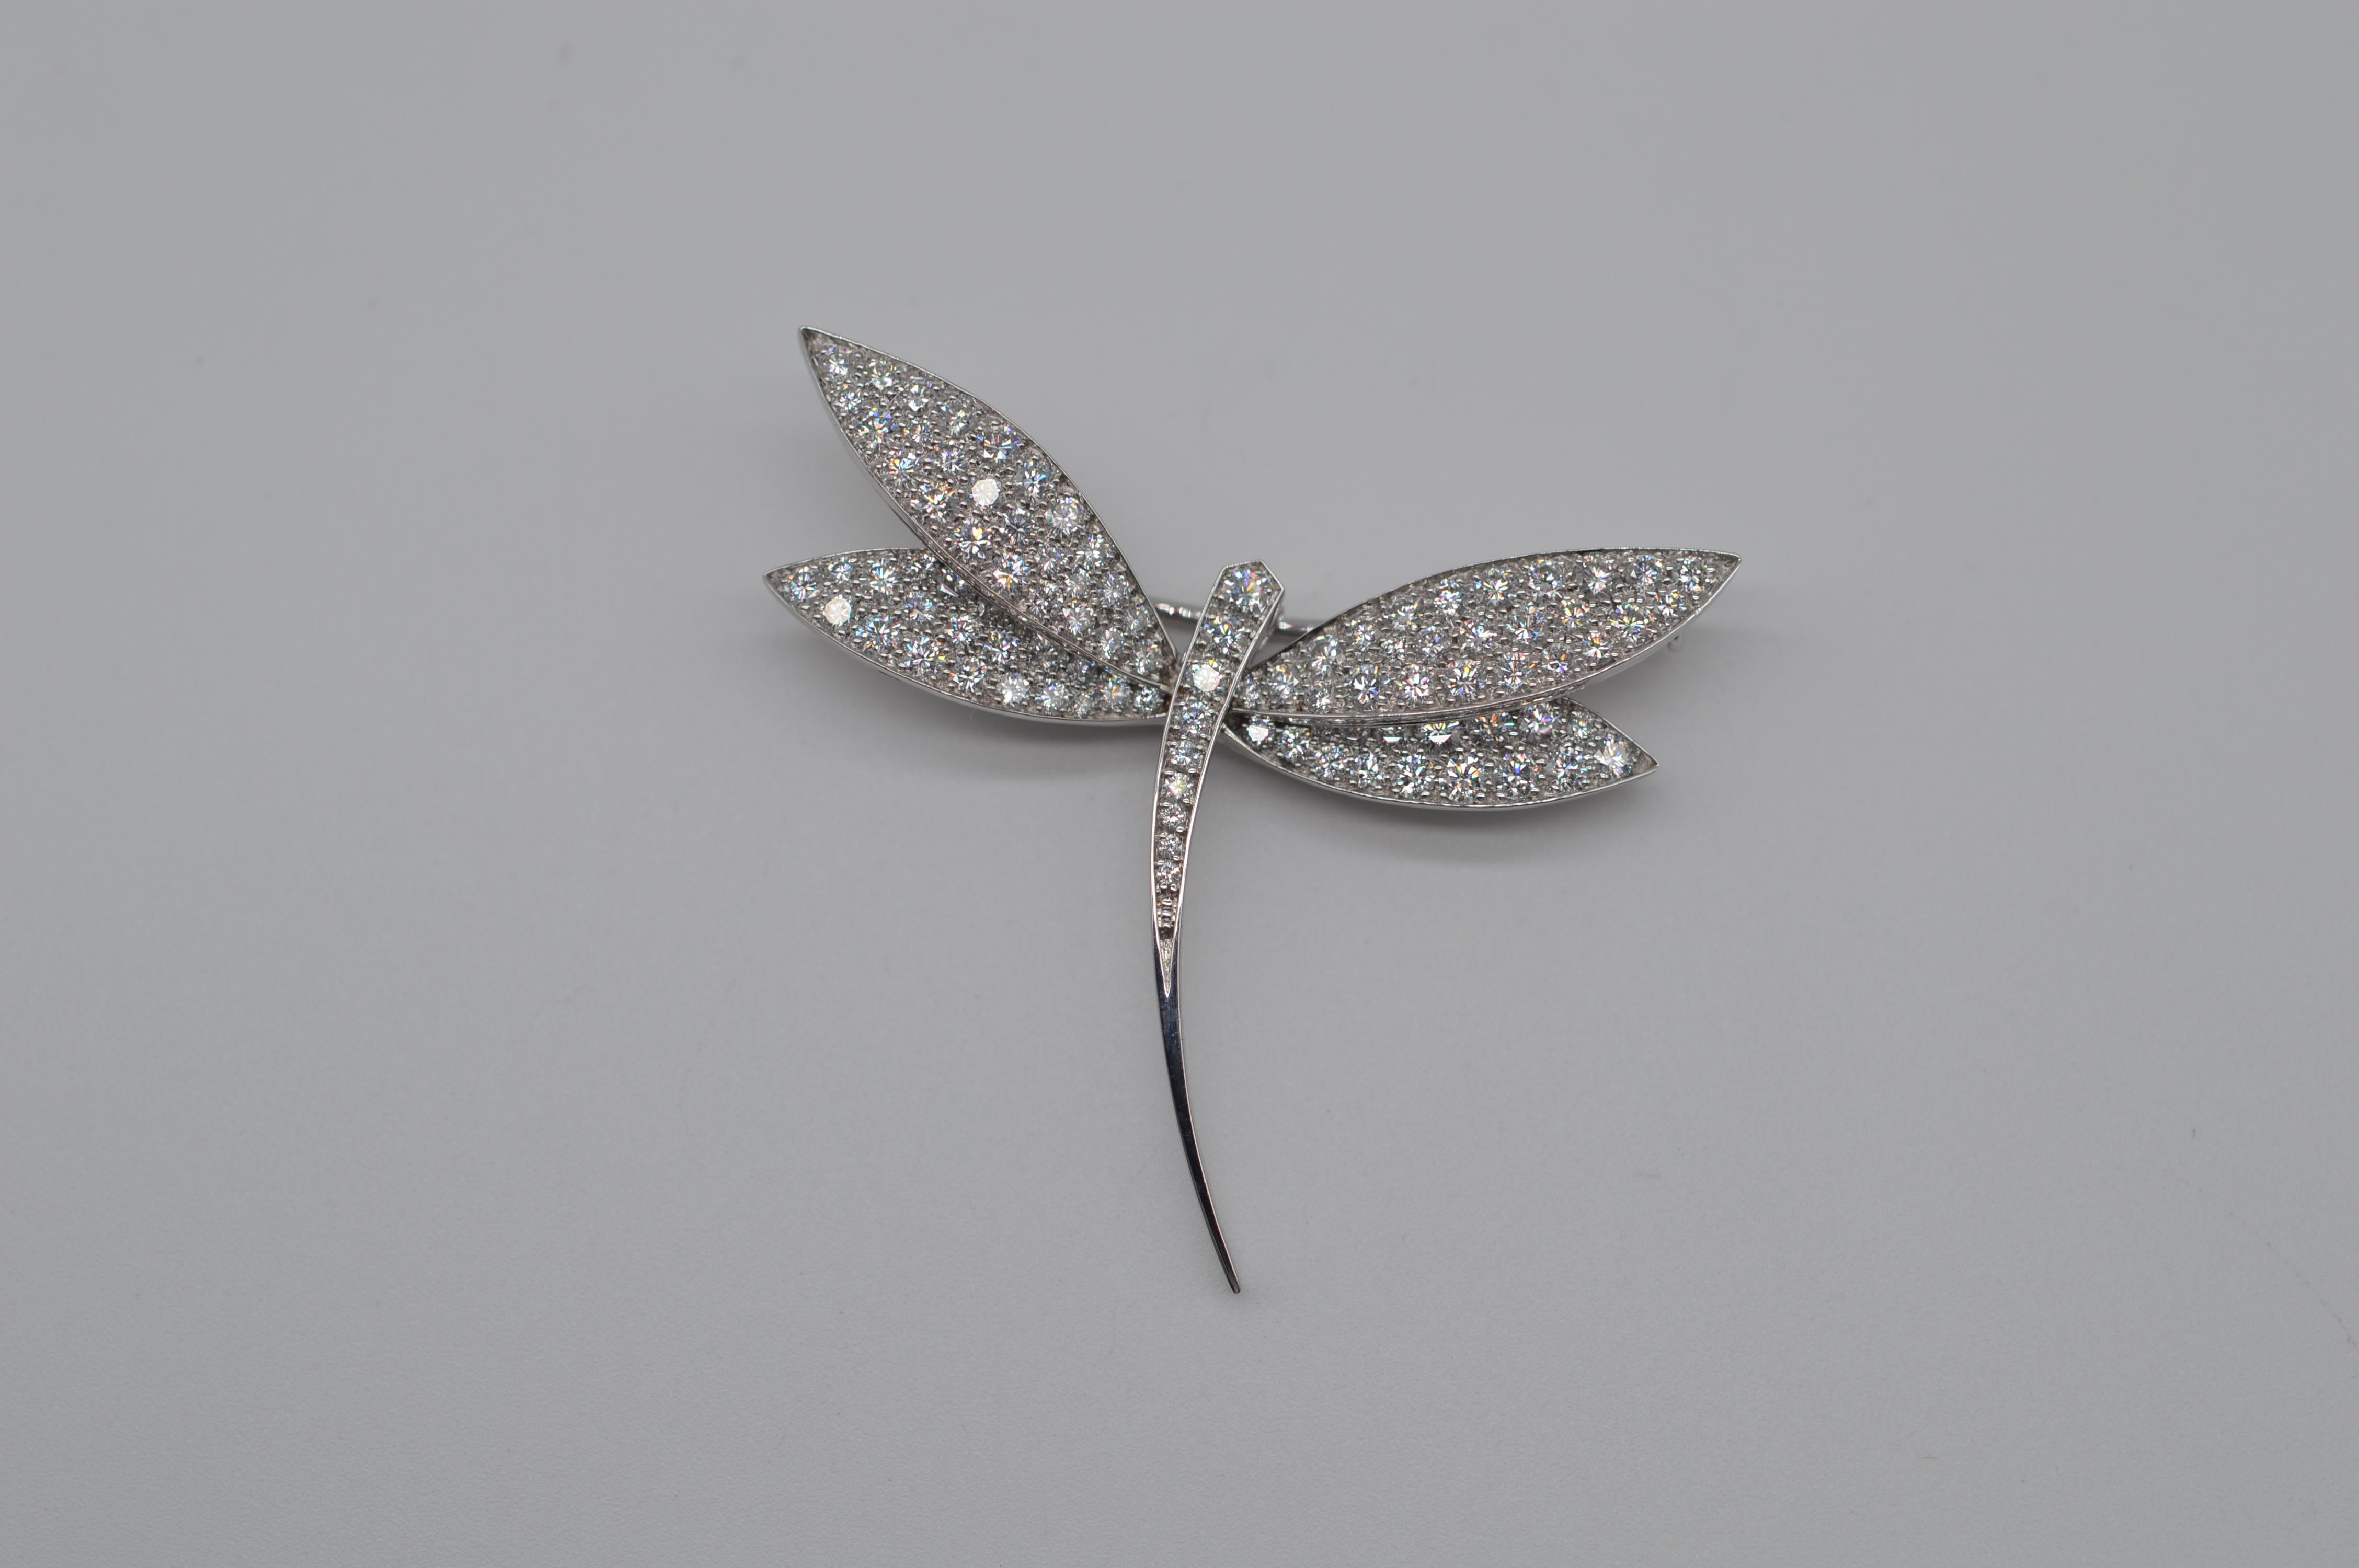 Van Cleef & Arpels Dragonfly Diamonds Brooch Unworn
18K White Gold
Weight 7.8 grams 
Diamonds Setting 
Set with 101 Round Diamonds for an approximative weight of 2.55 carats (Color F-G / Clarity VVS1-2)
Comes with original box
From 2000